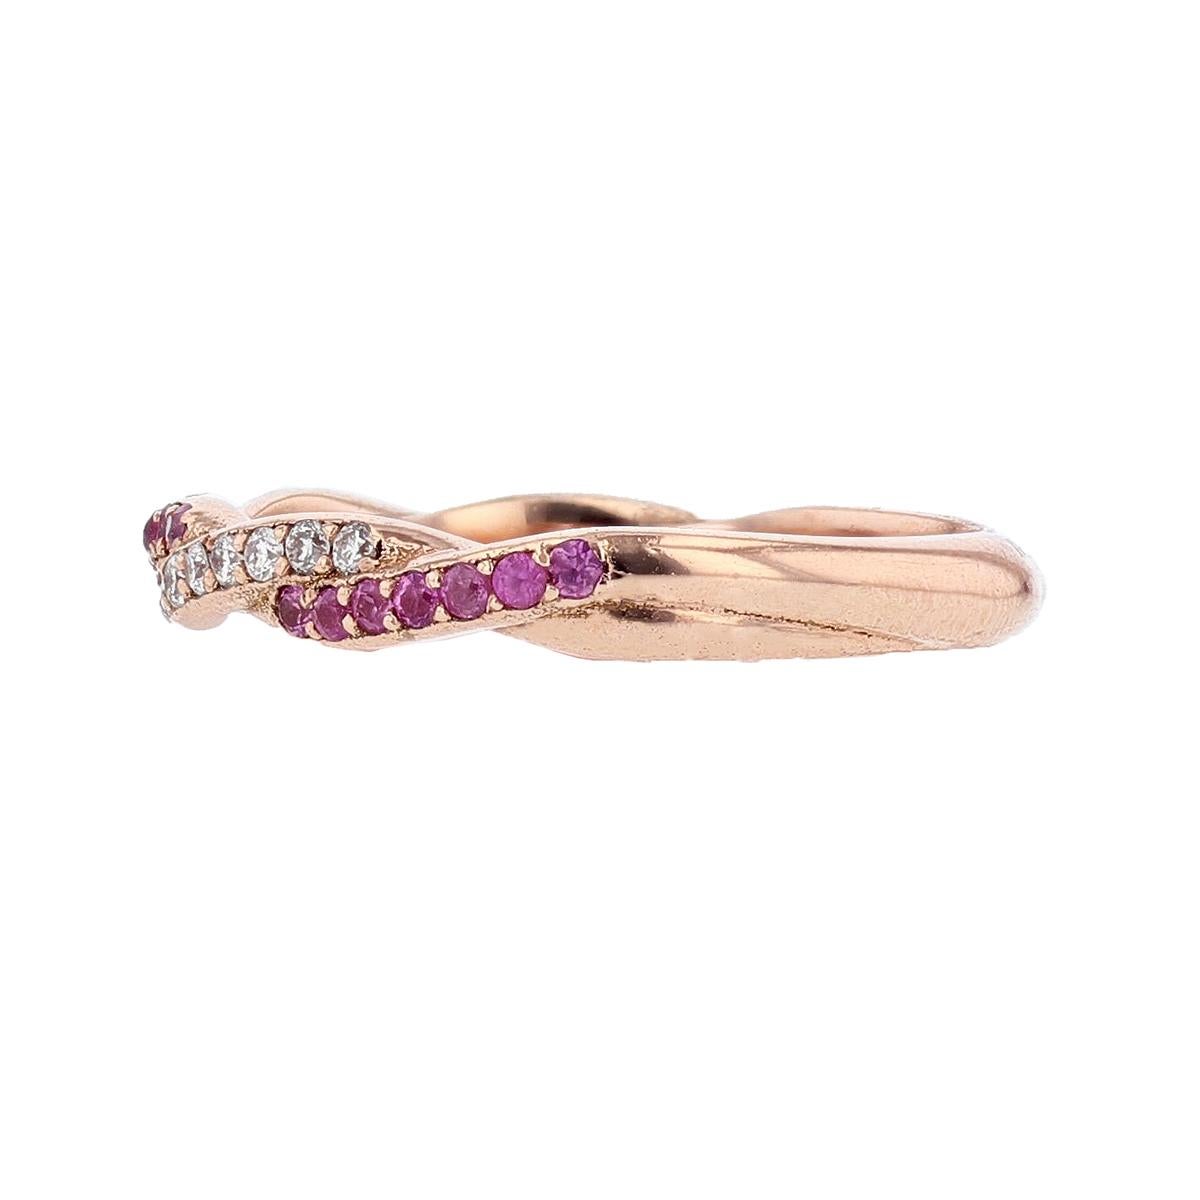 This beautiful twisted band is designed by Nazarelle and made in 14 karat rose gold. The ring features 33 round pink sapphires weighing 0.24ct and 18 round diamonds weighing 0.12ct.